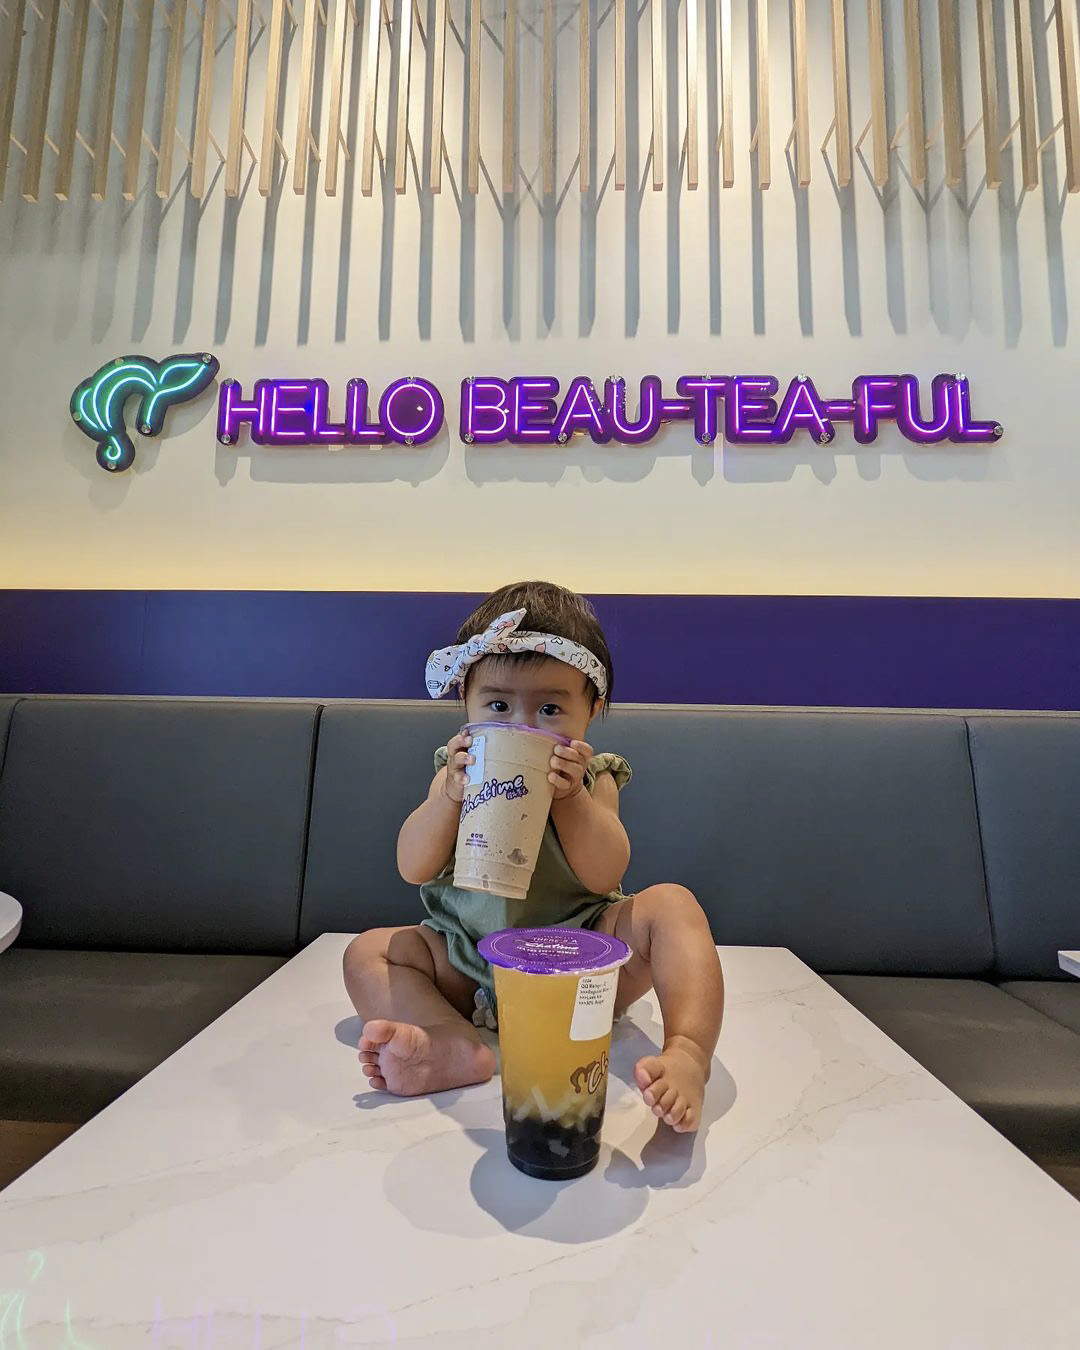 @todaywithmaisie: “Every Chatime location we have gone to, the staff are extremely friendly and the reason why Chatime is our go to. Also the drinks are delicious which is a bonus too ;)